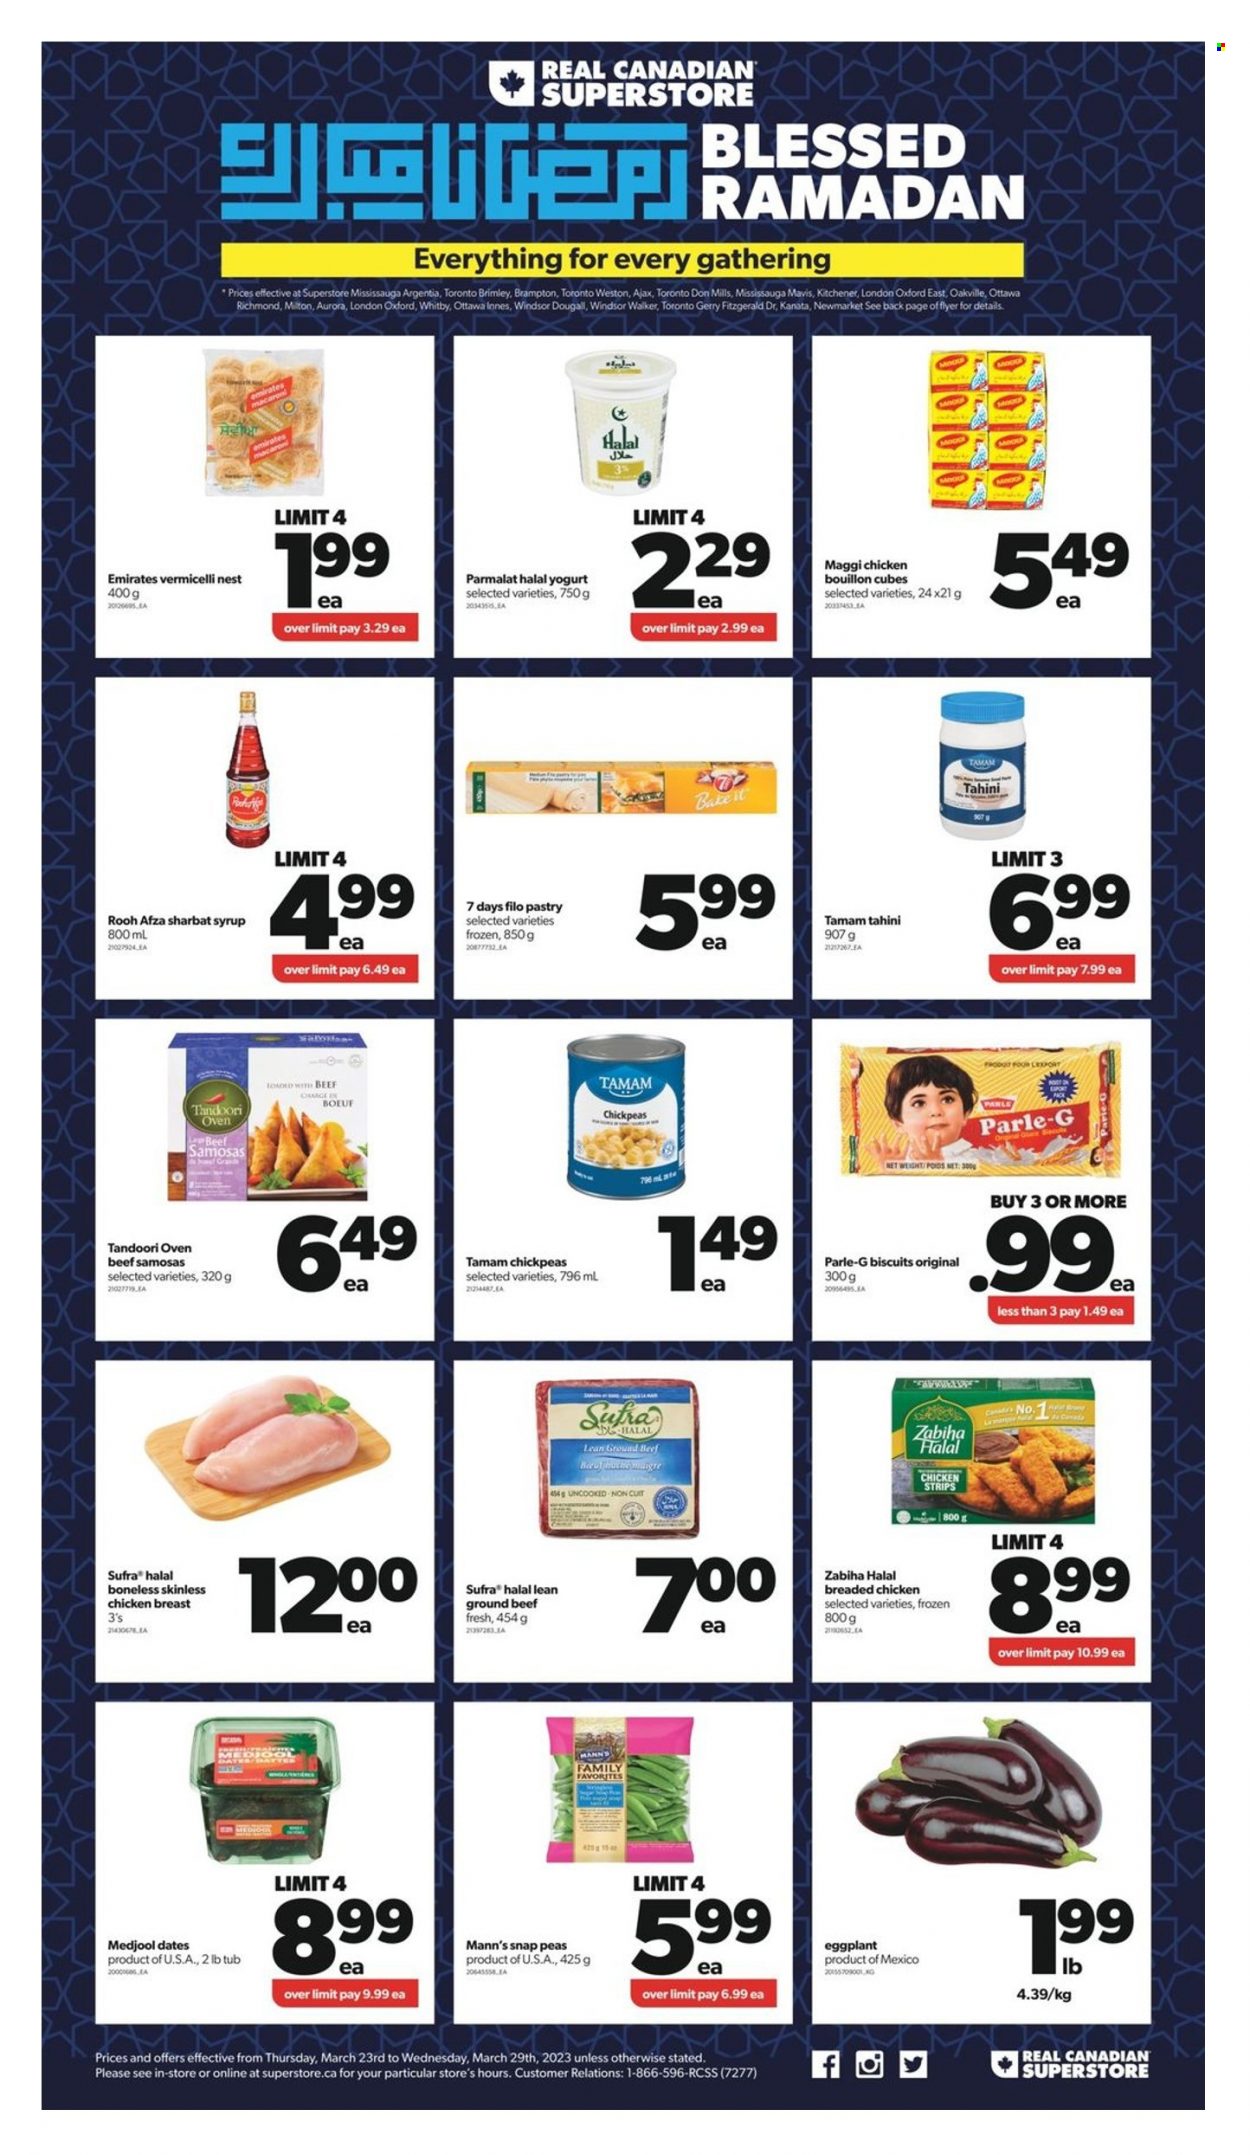 thumbnail - Circulaire Real Canadian Superstore - 23 Mars 2023 - 29 Mars 2023 - Produits soldés - biscuits, bouillon, Ajax. Page 1.